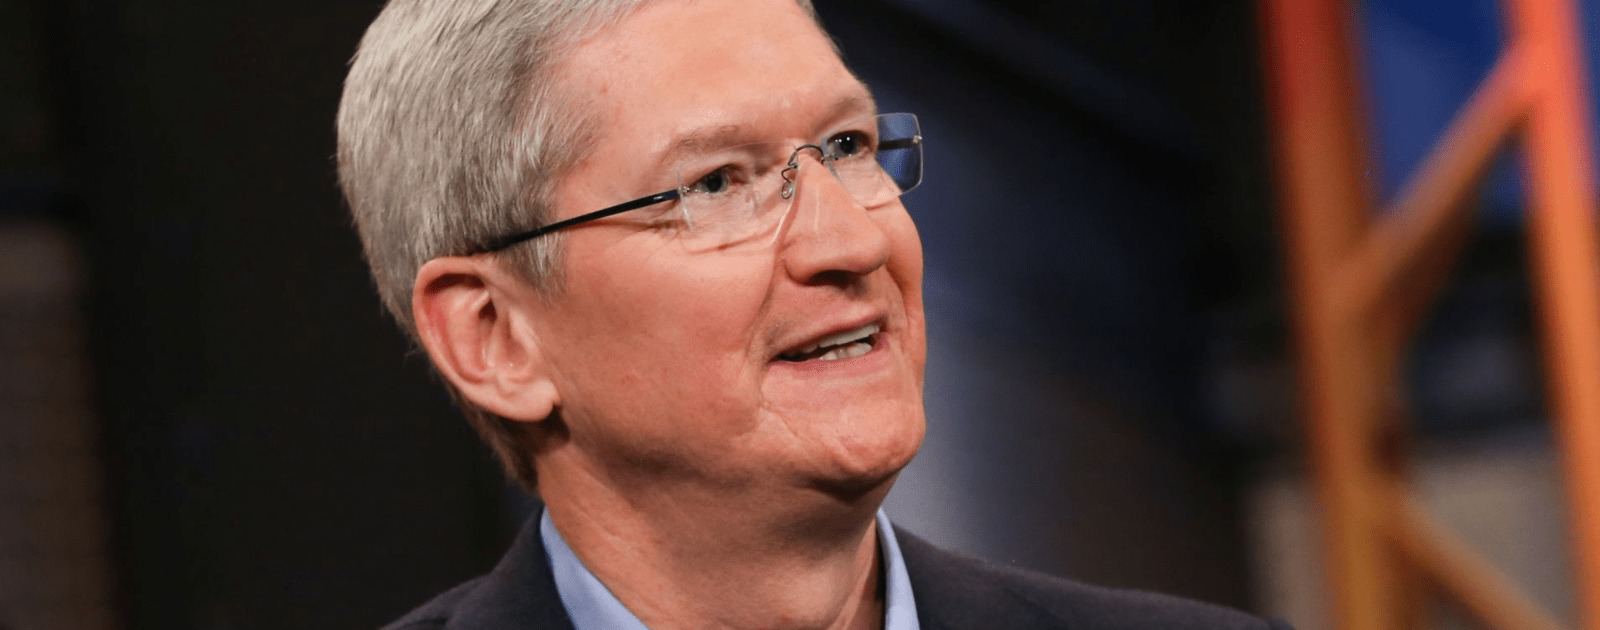 Tim Cook VICE Interview Is Nice, But Reveals Little